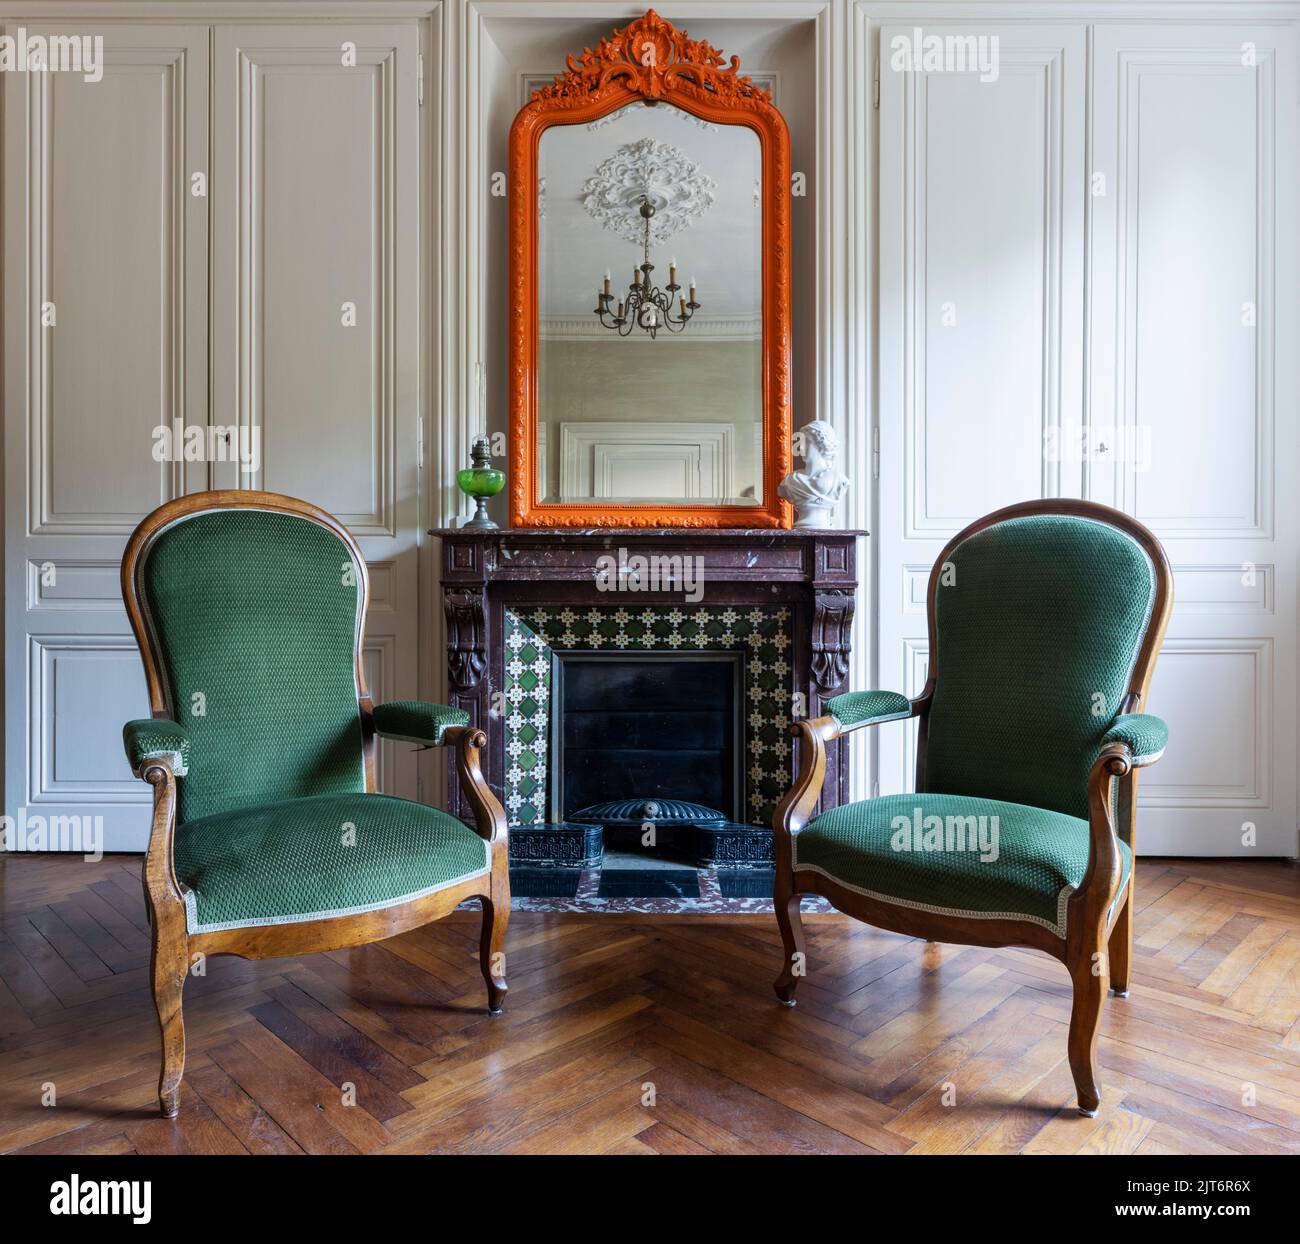 Two armchairs in front of fireplace in a living room, France Stock Photo